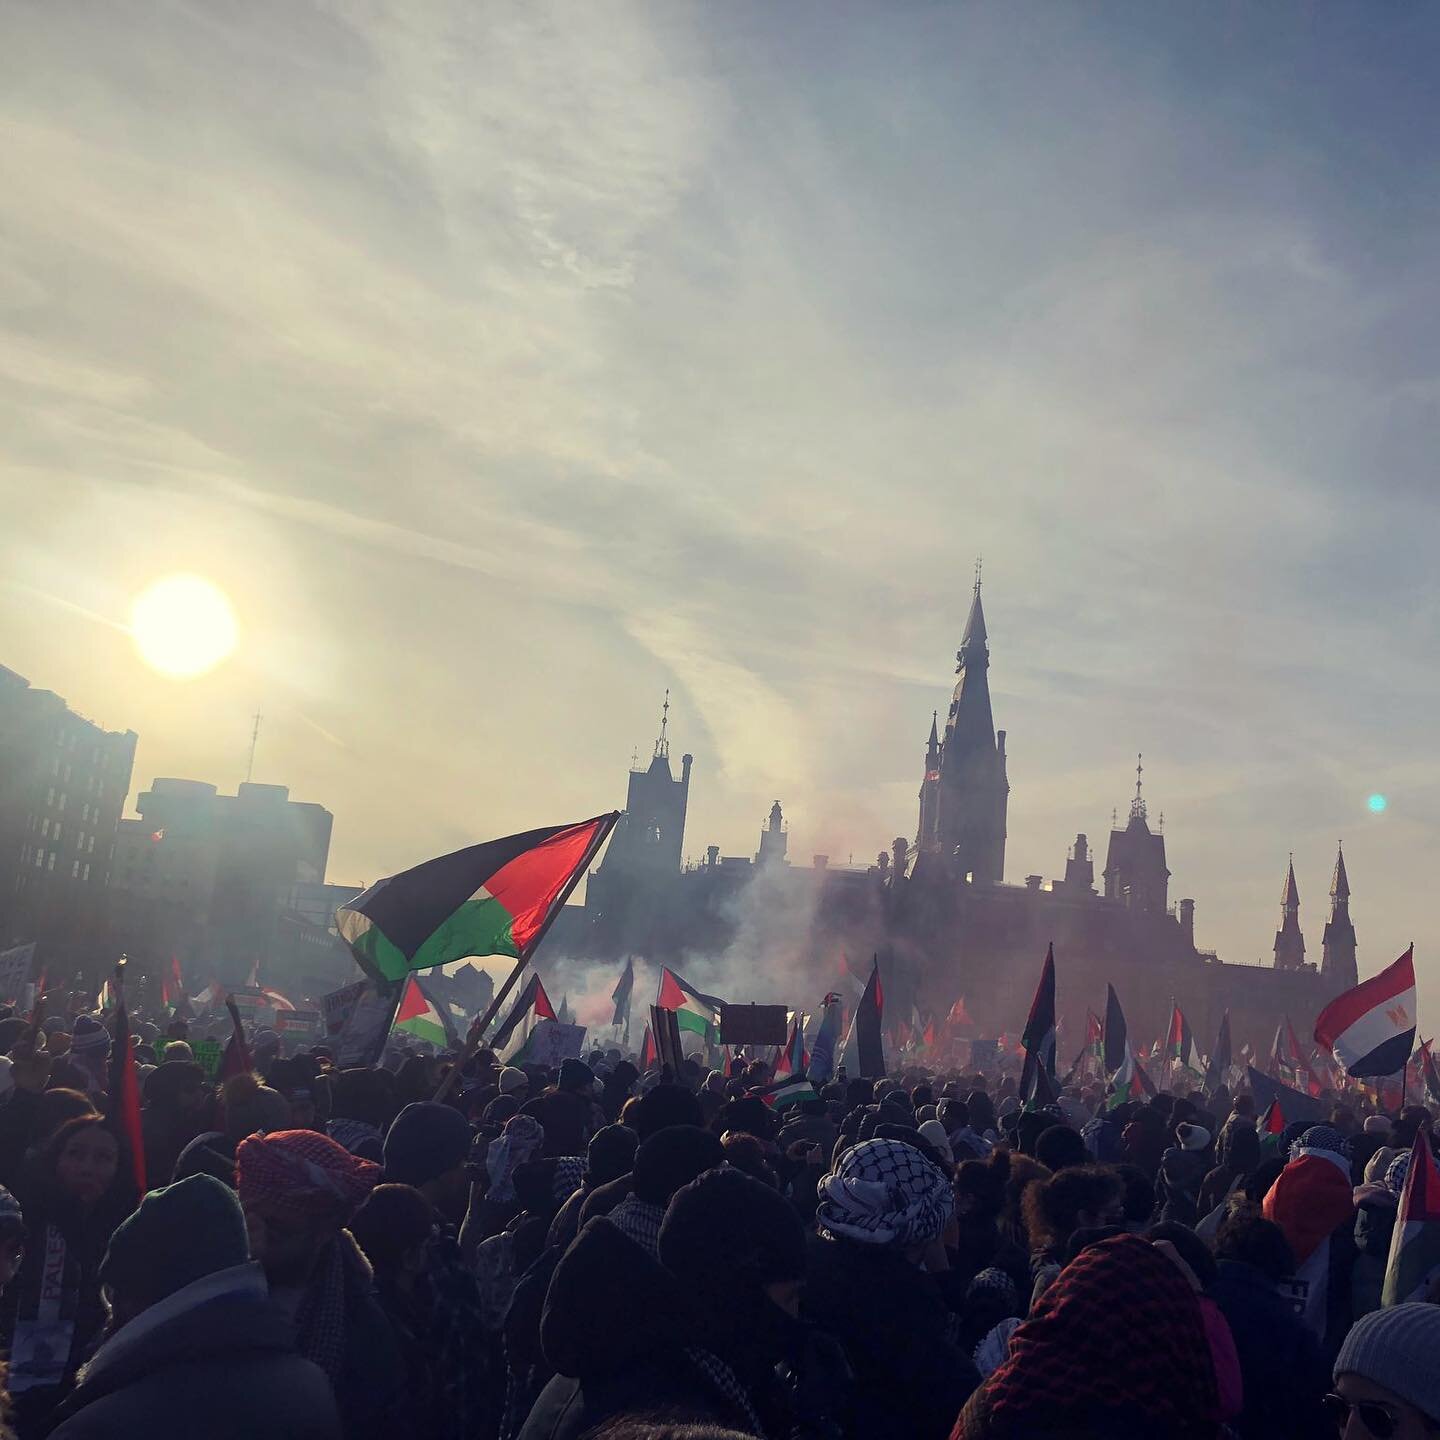 National Day of Action at Parliament Hill - many thousands demanding a permanent ceasefire now! End the siege! Stop Canada&rsquo;s complicity! Free Palestine!